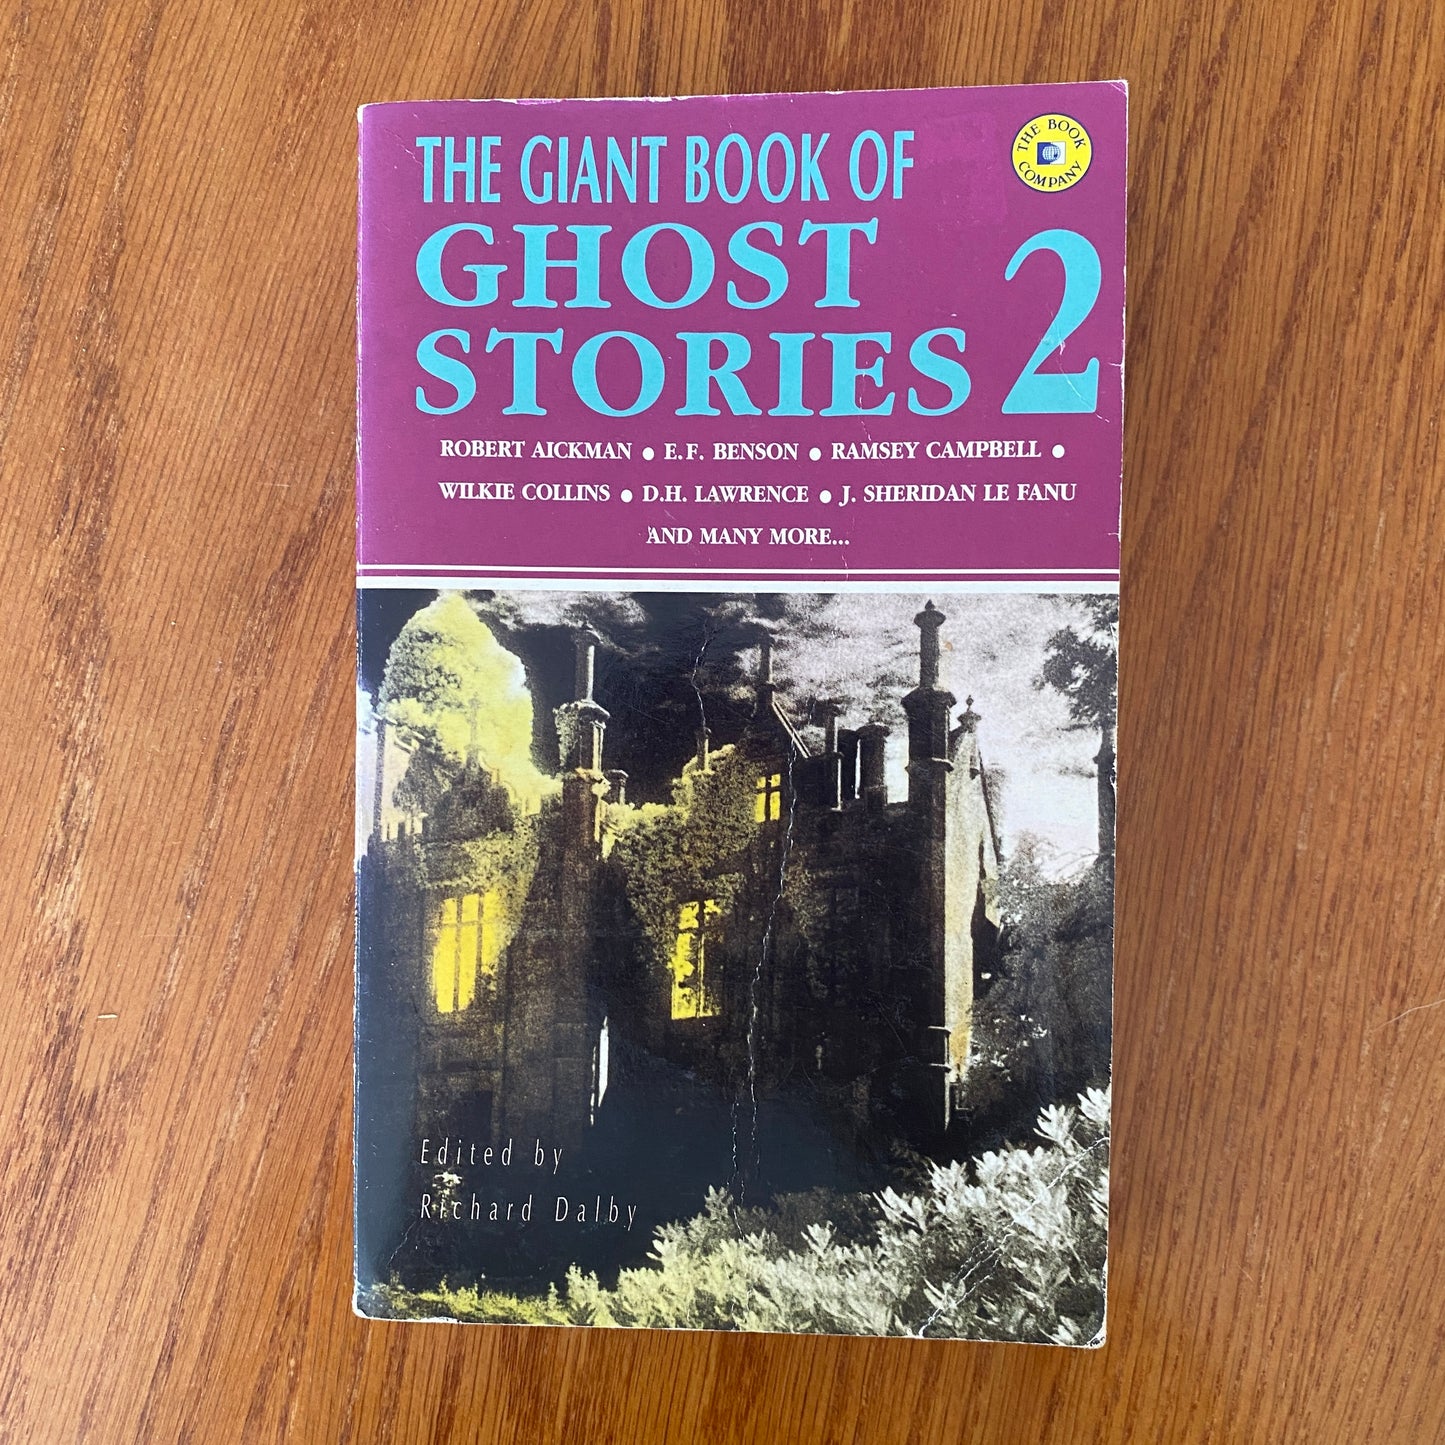 The Giant Book Of Ghost Stories 2 - Richard Dalby